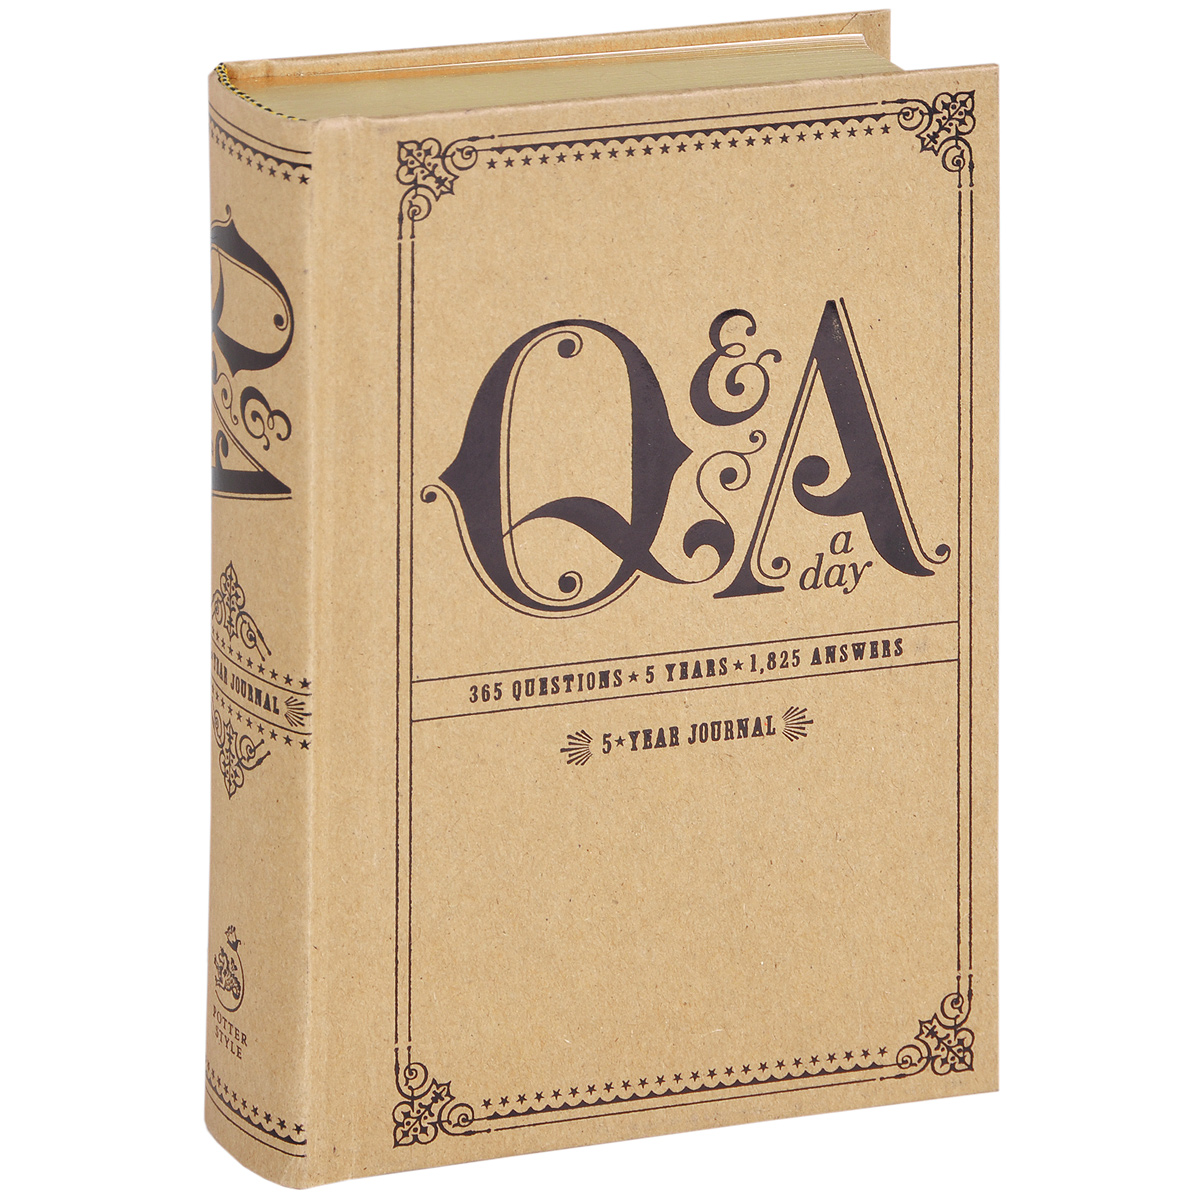 Q&A a Day: 5-Year Journal: 365 Questions: 1825 Answers